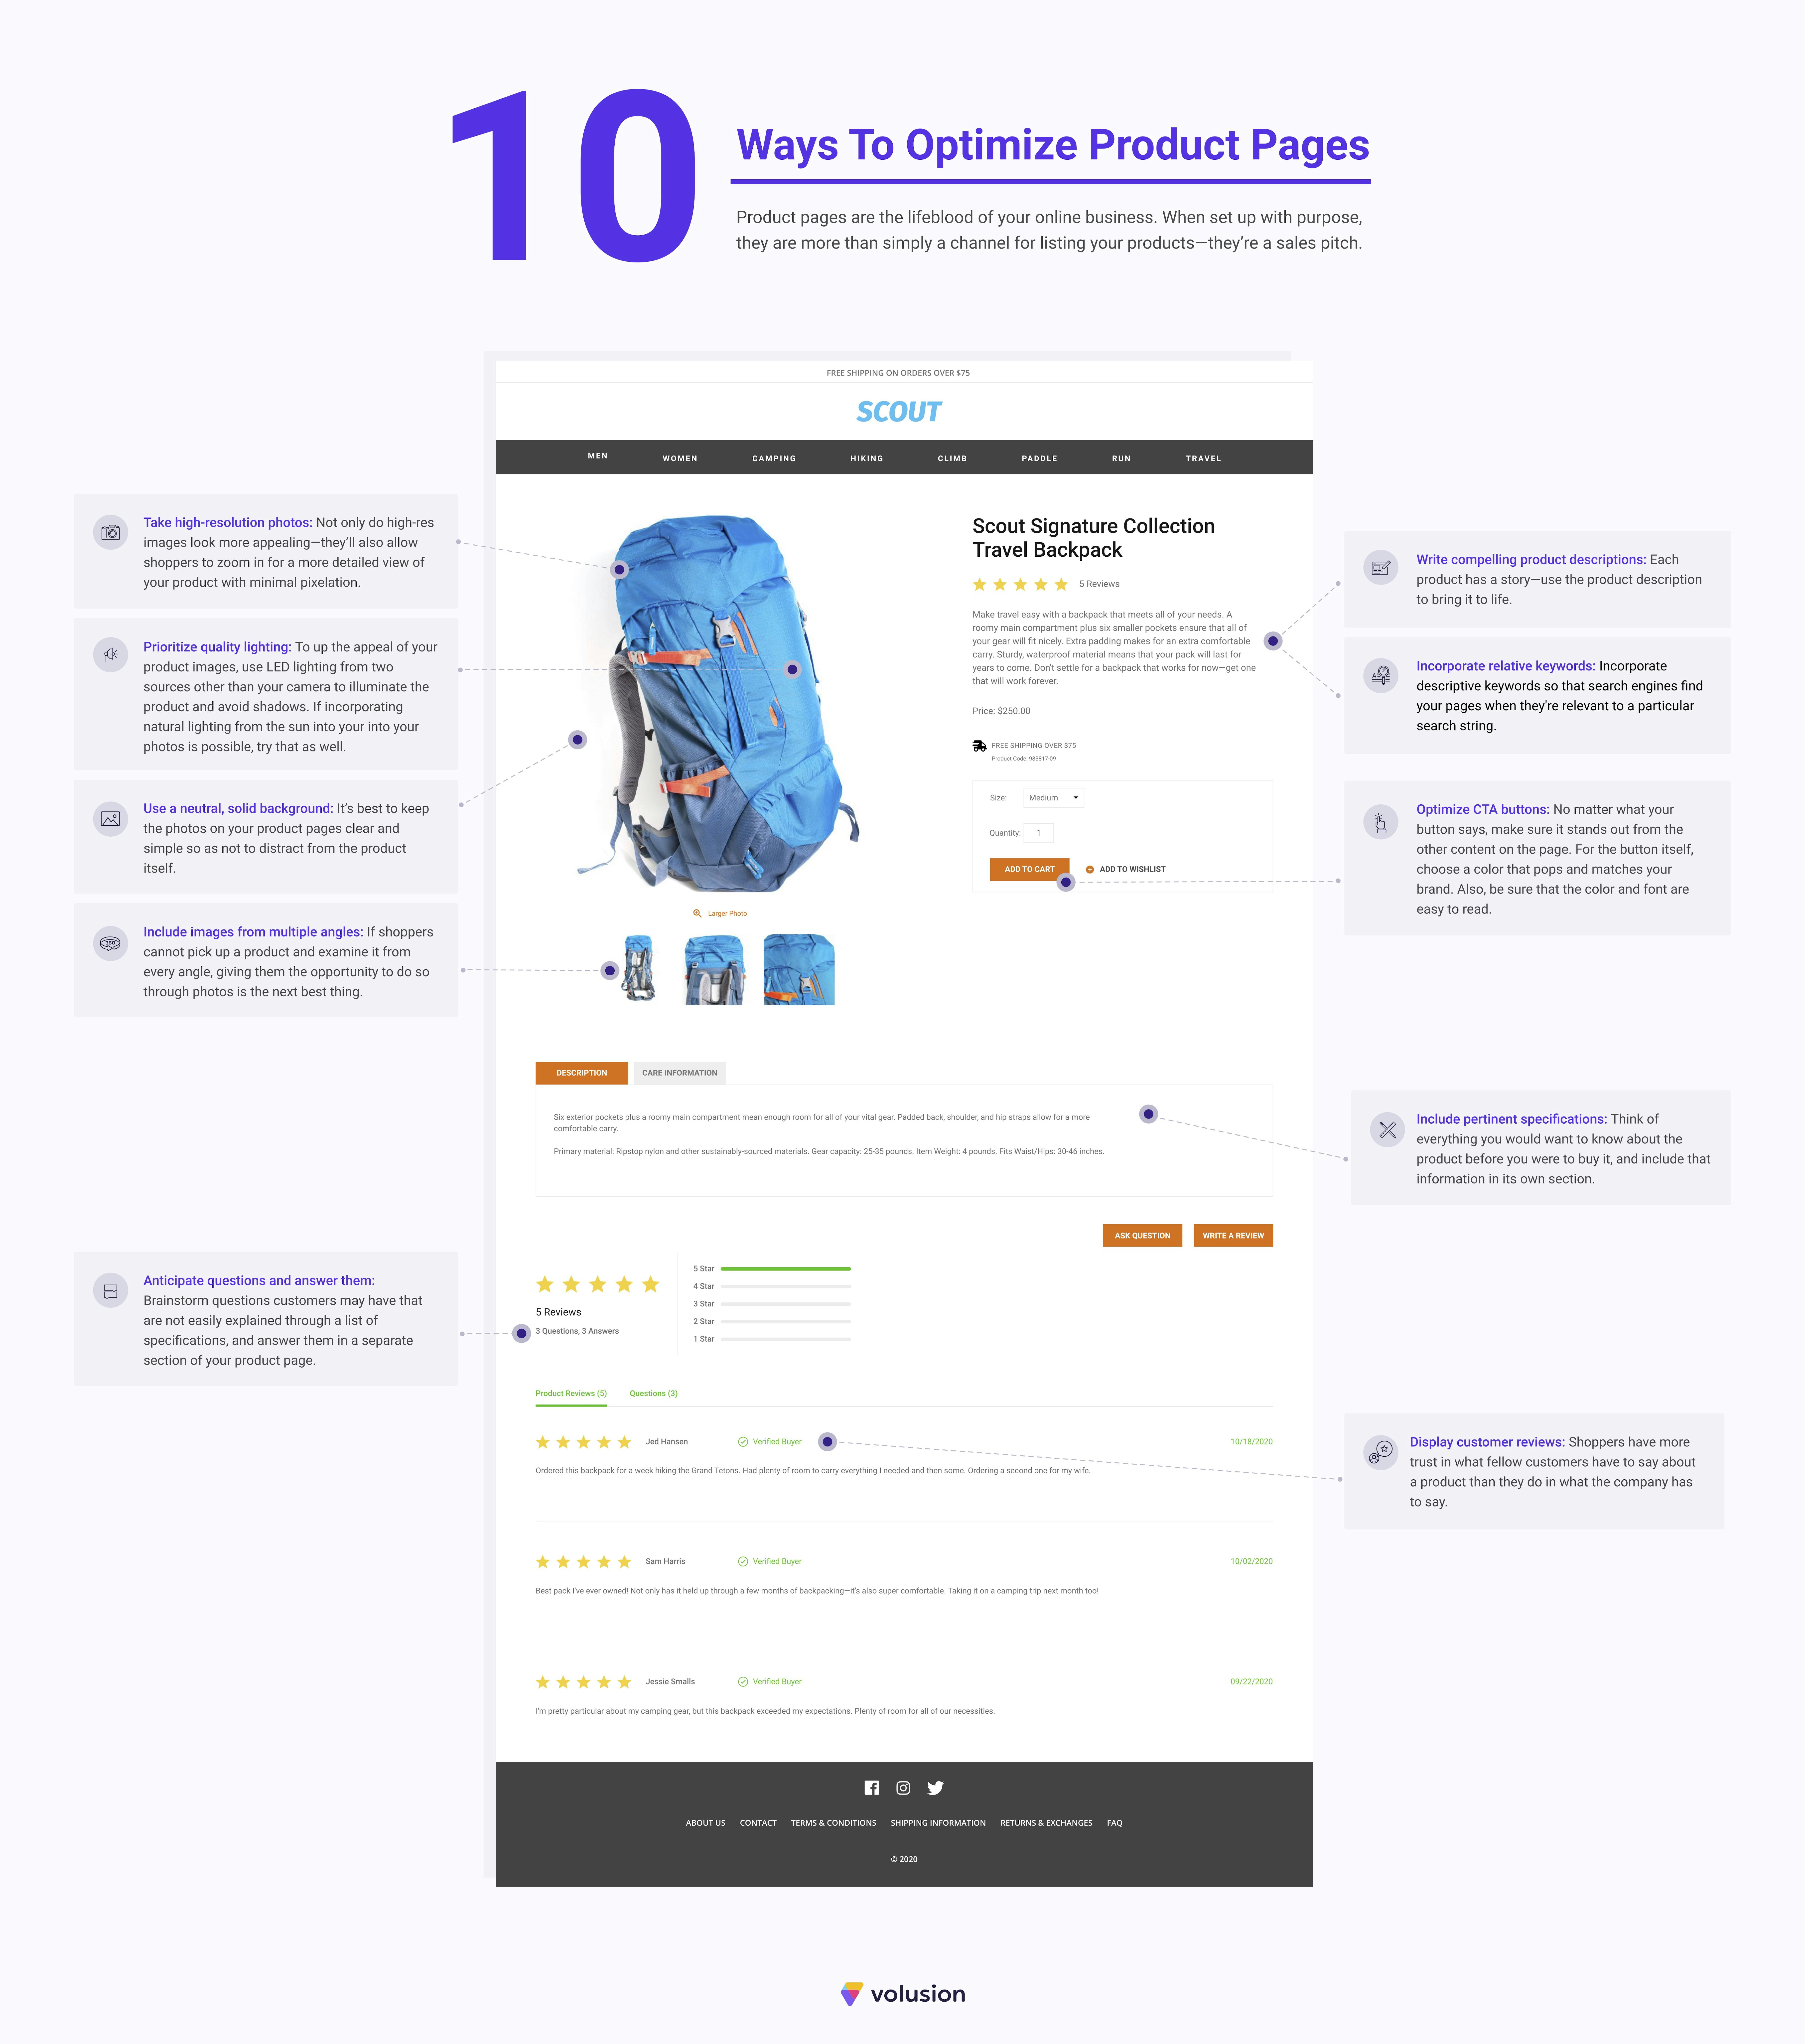 10 Ways to Optimize Product Pages